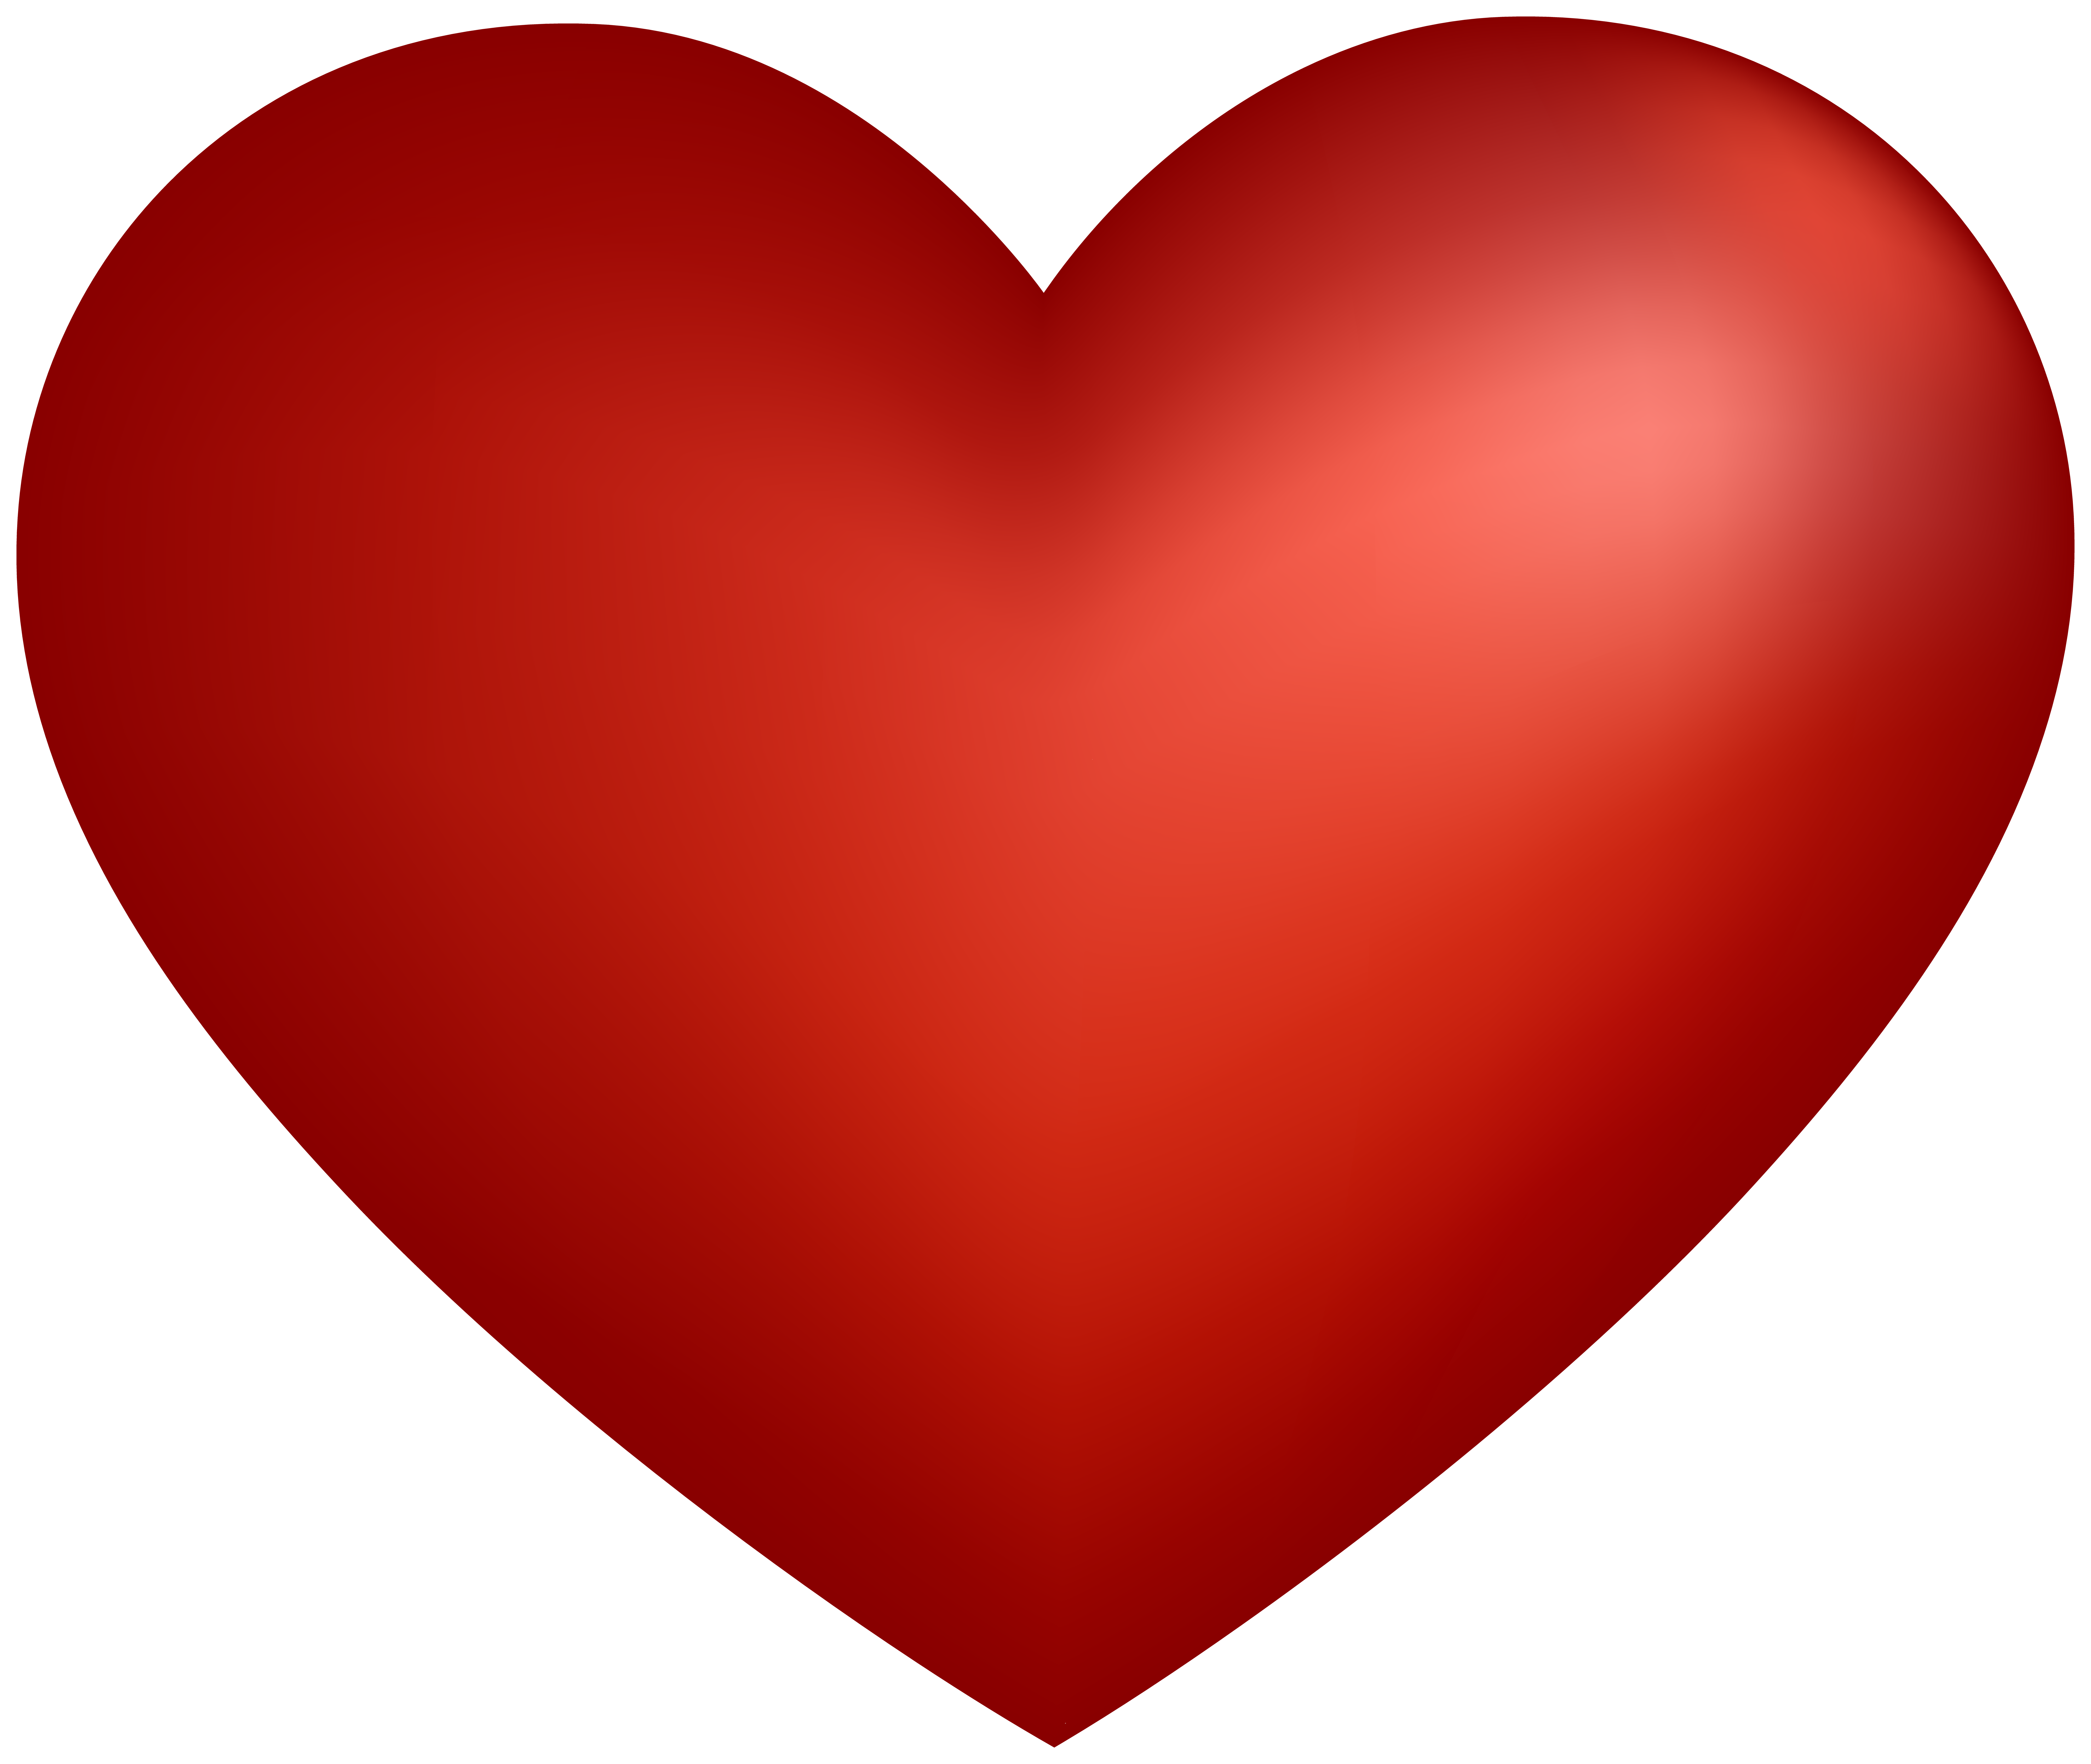 Red Heart Transparent Image | Gallery Yopriceville - High ...